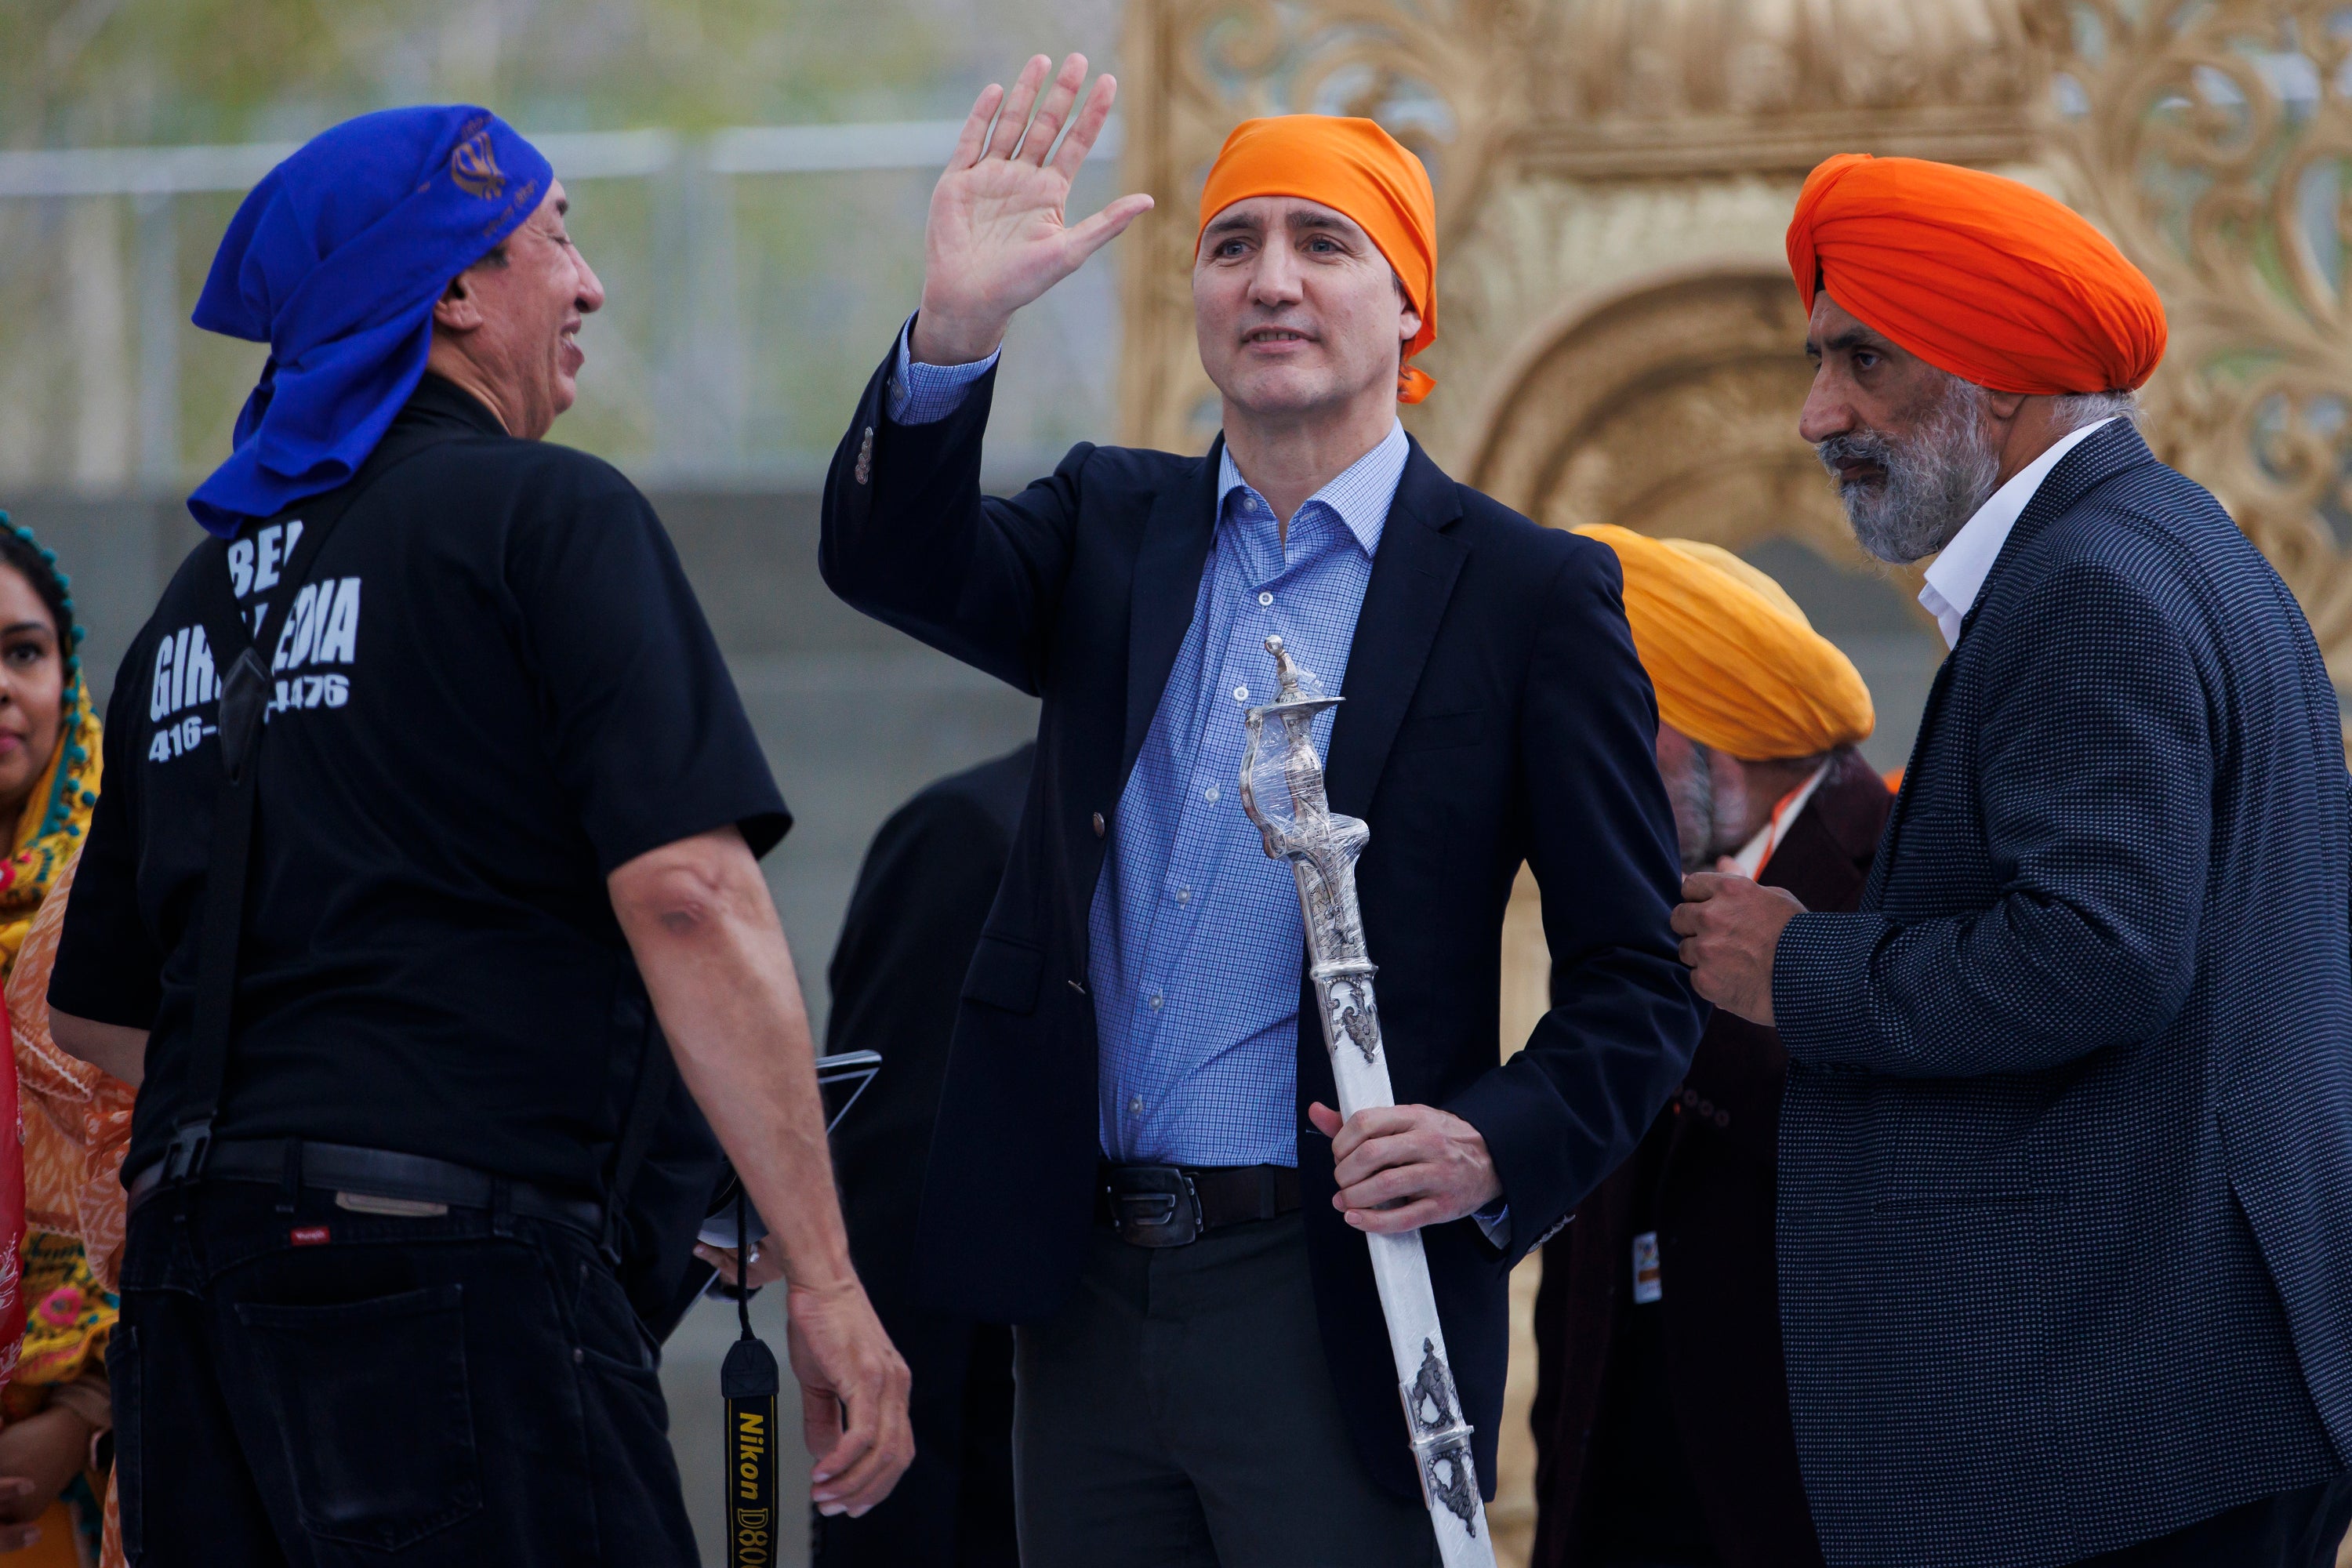 Canadian prime minister Justin Trudeau waves to the crowd after receiving the gift of a ceremonial sword from Sikhs in Ontario